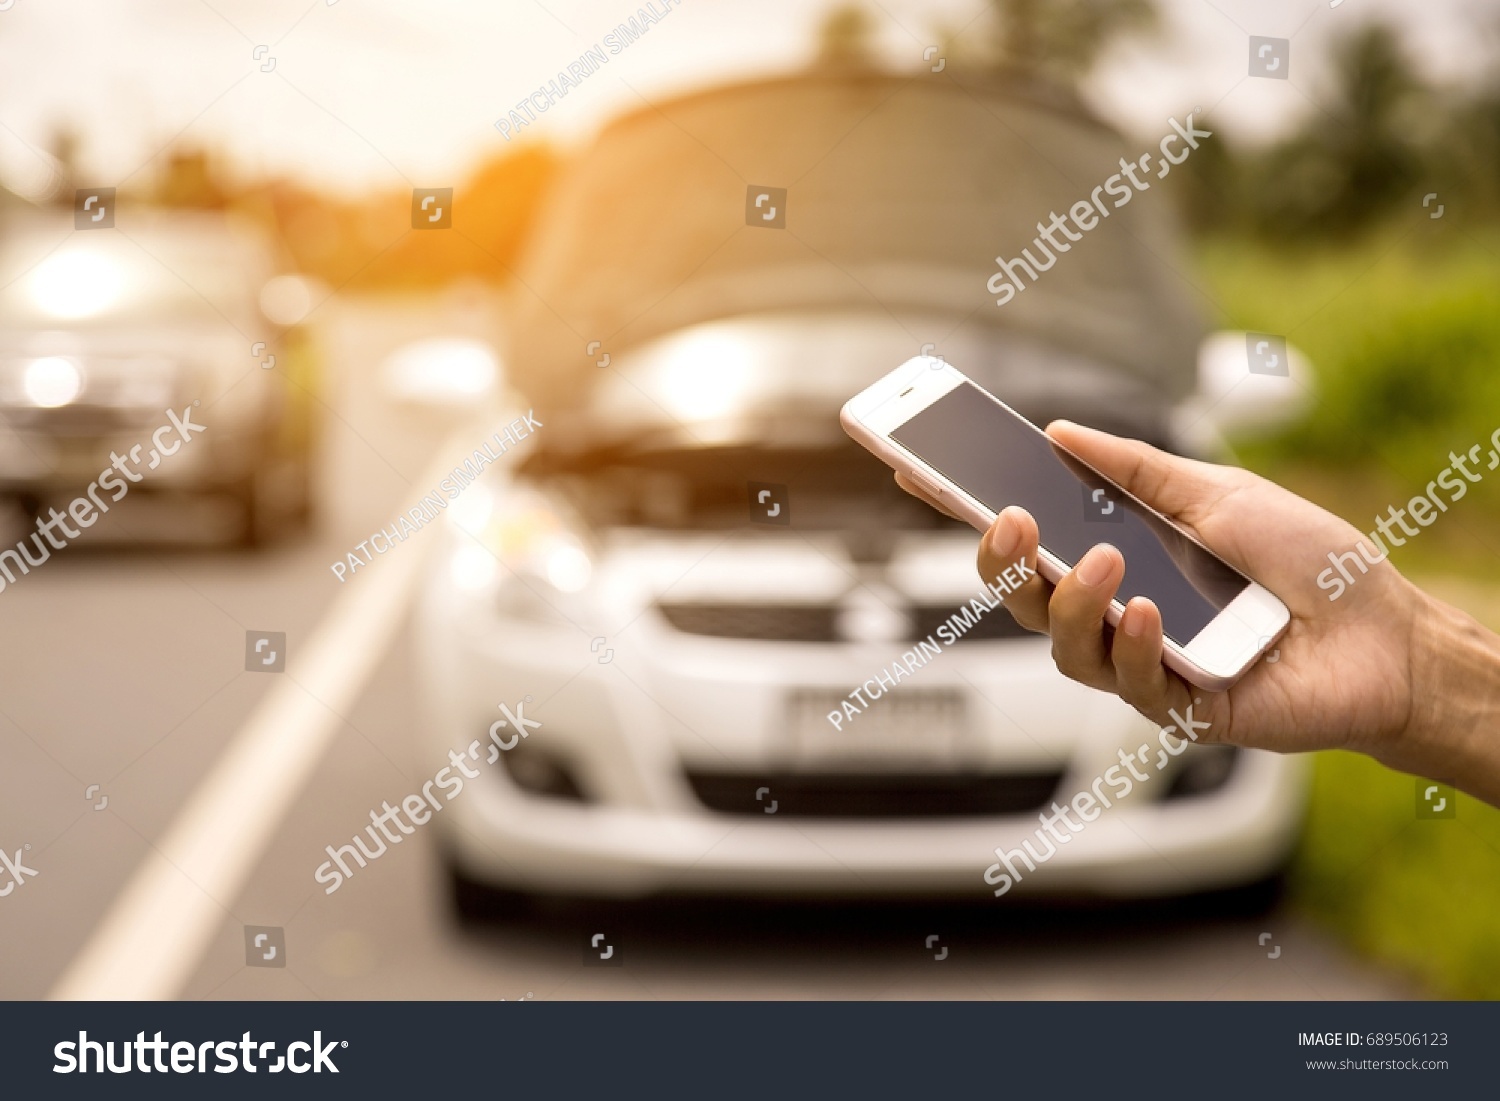 Using a mobile phone call a car mechanic because car was broken. #689506123